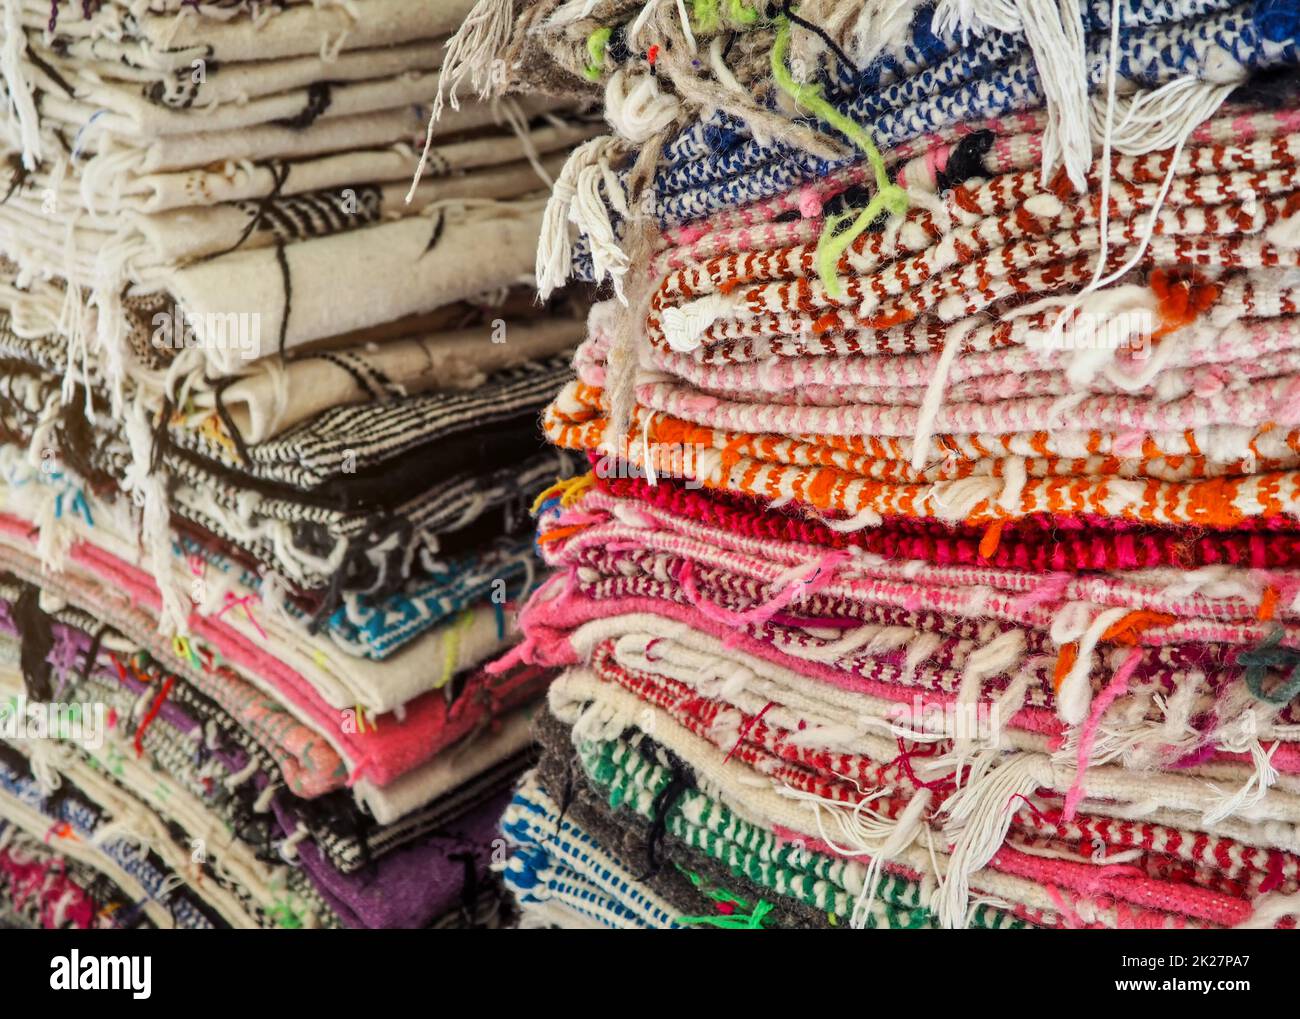 Colourful textile rugs or blankets displayed on street market in Marrakesh, Morocco - closeup detail Stock Photo